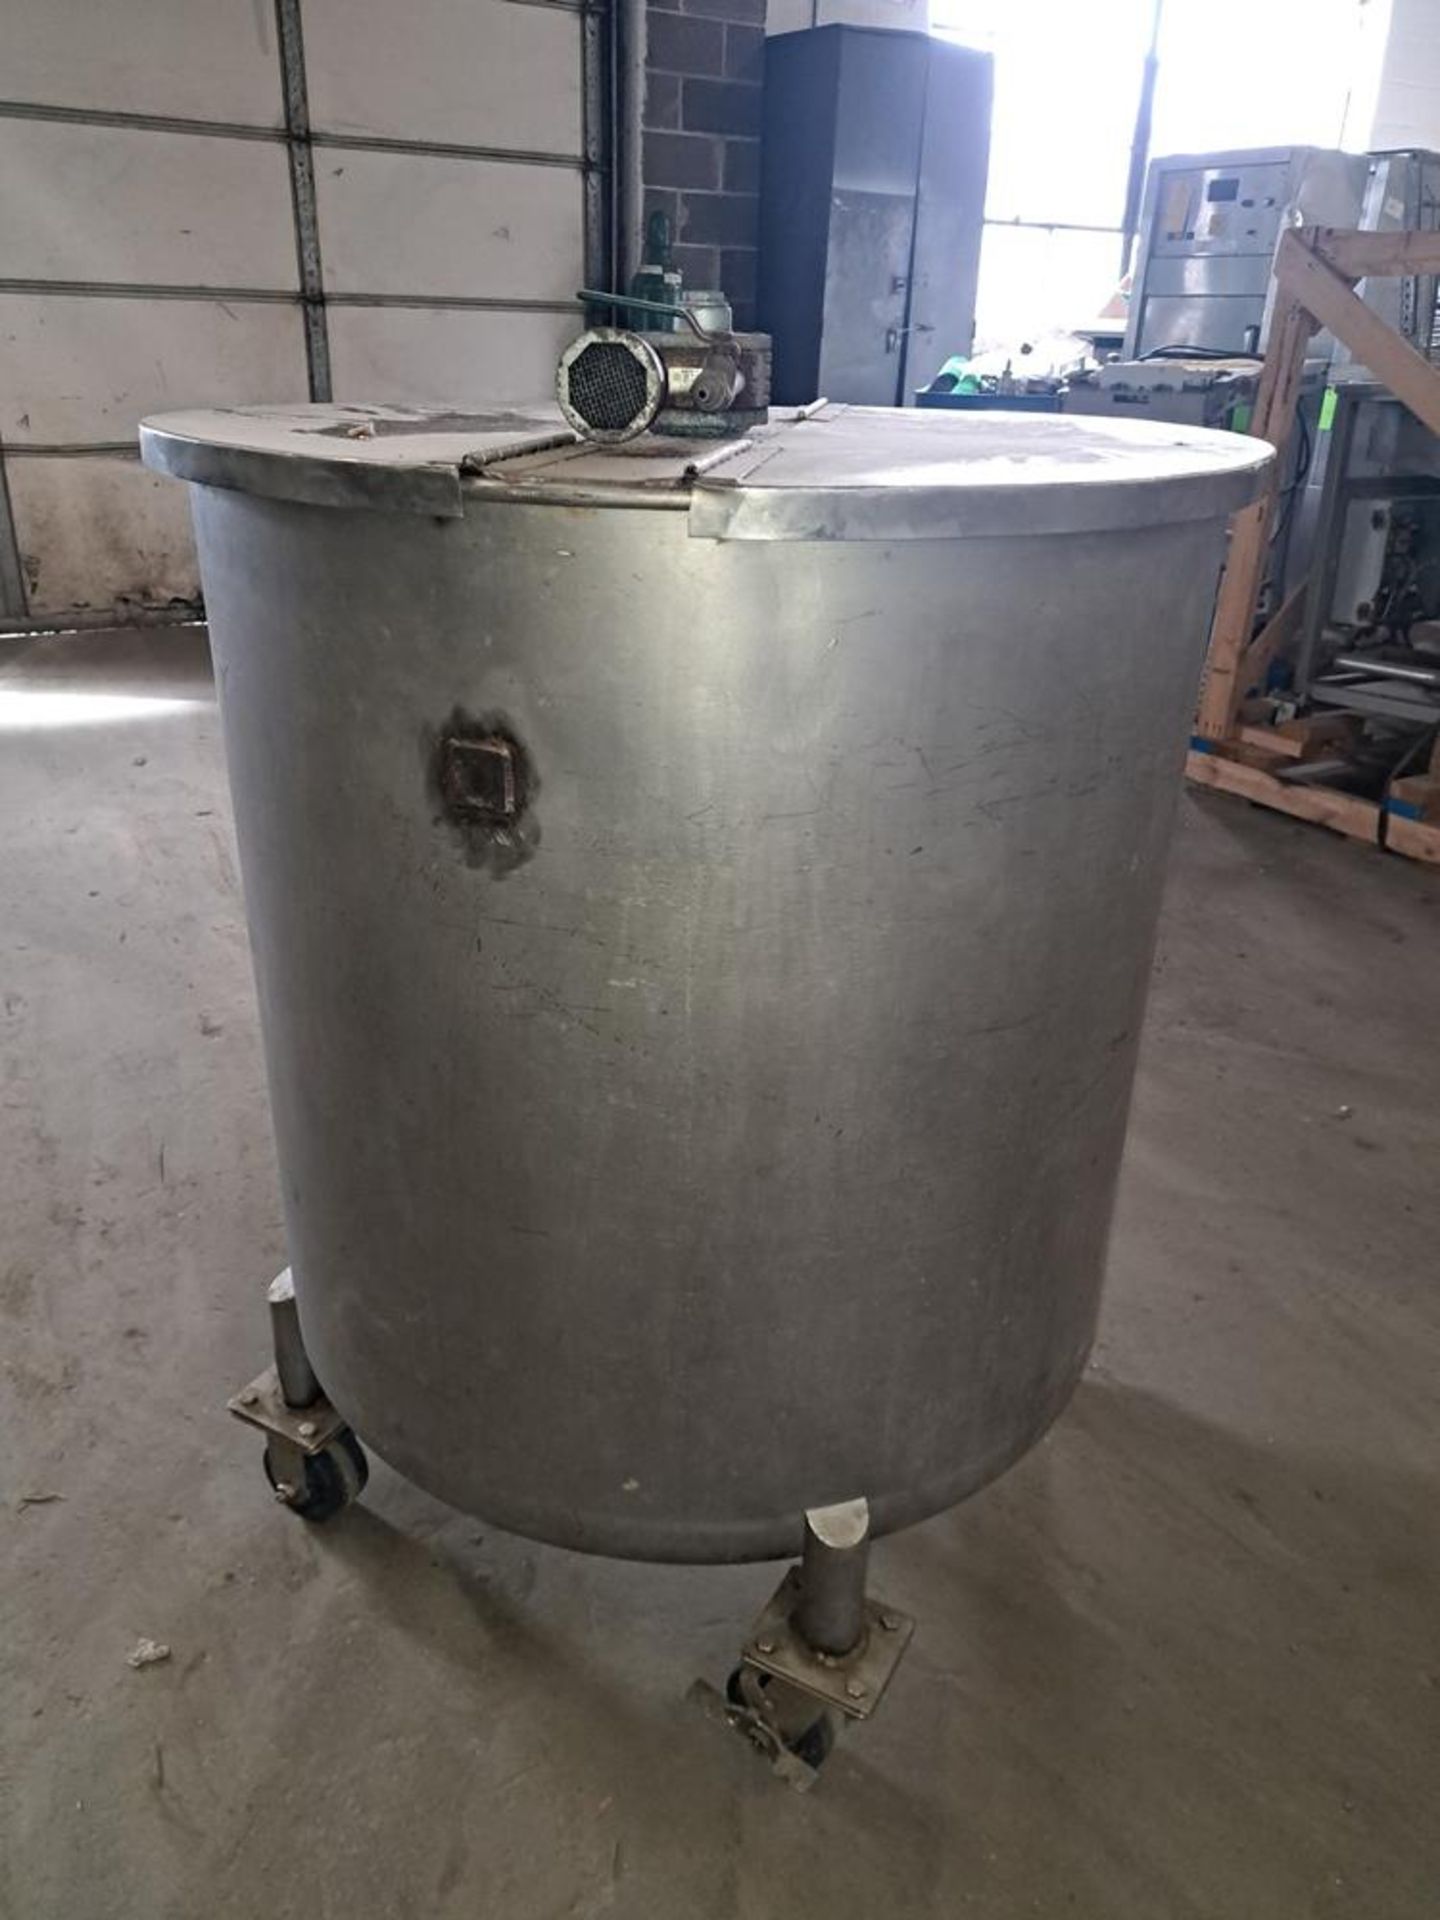 Portable Stainless Steel Mix Tank, 32" dia. X 34" deep with stainless steel pneumatic mixer (Located